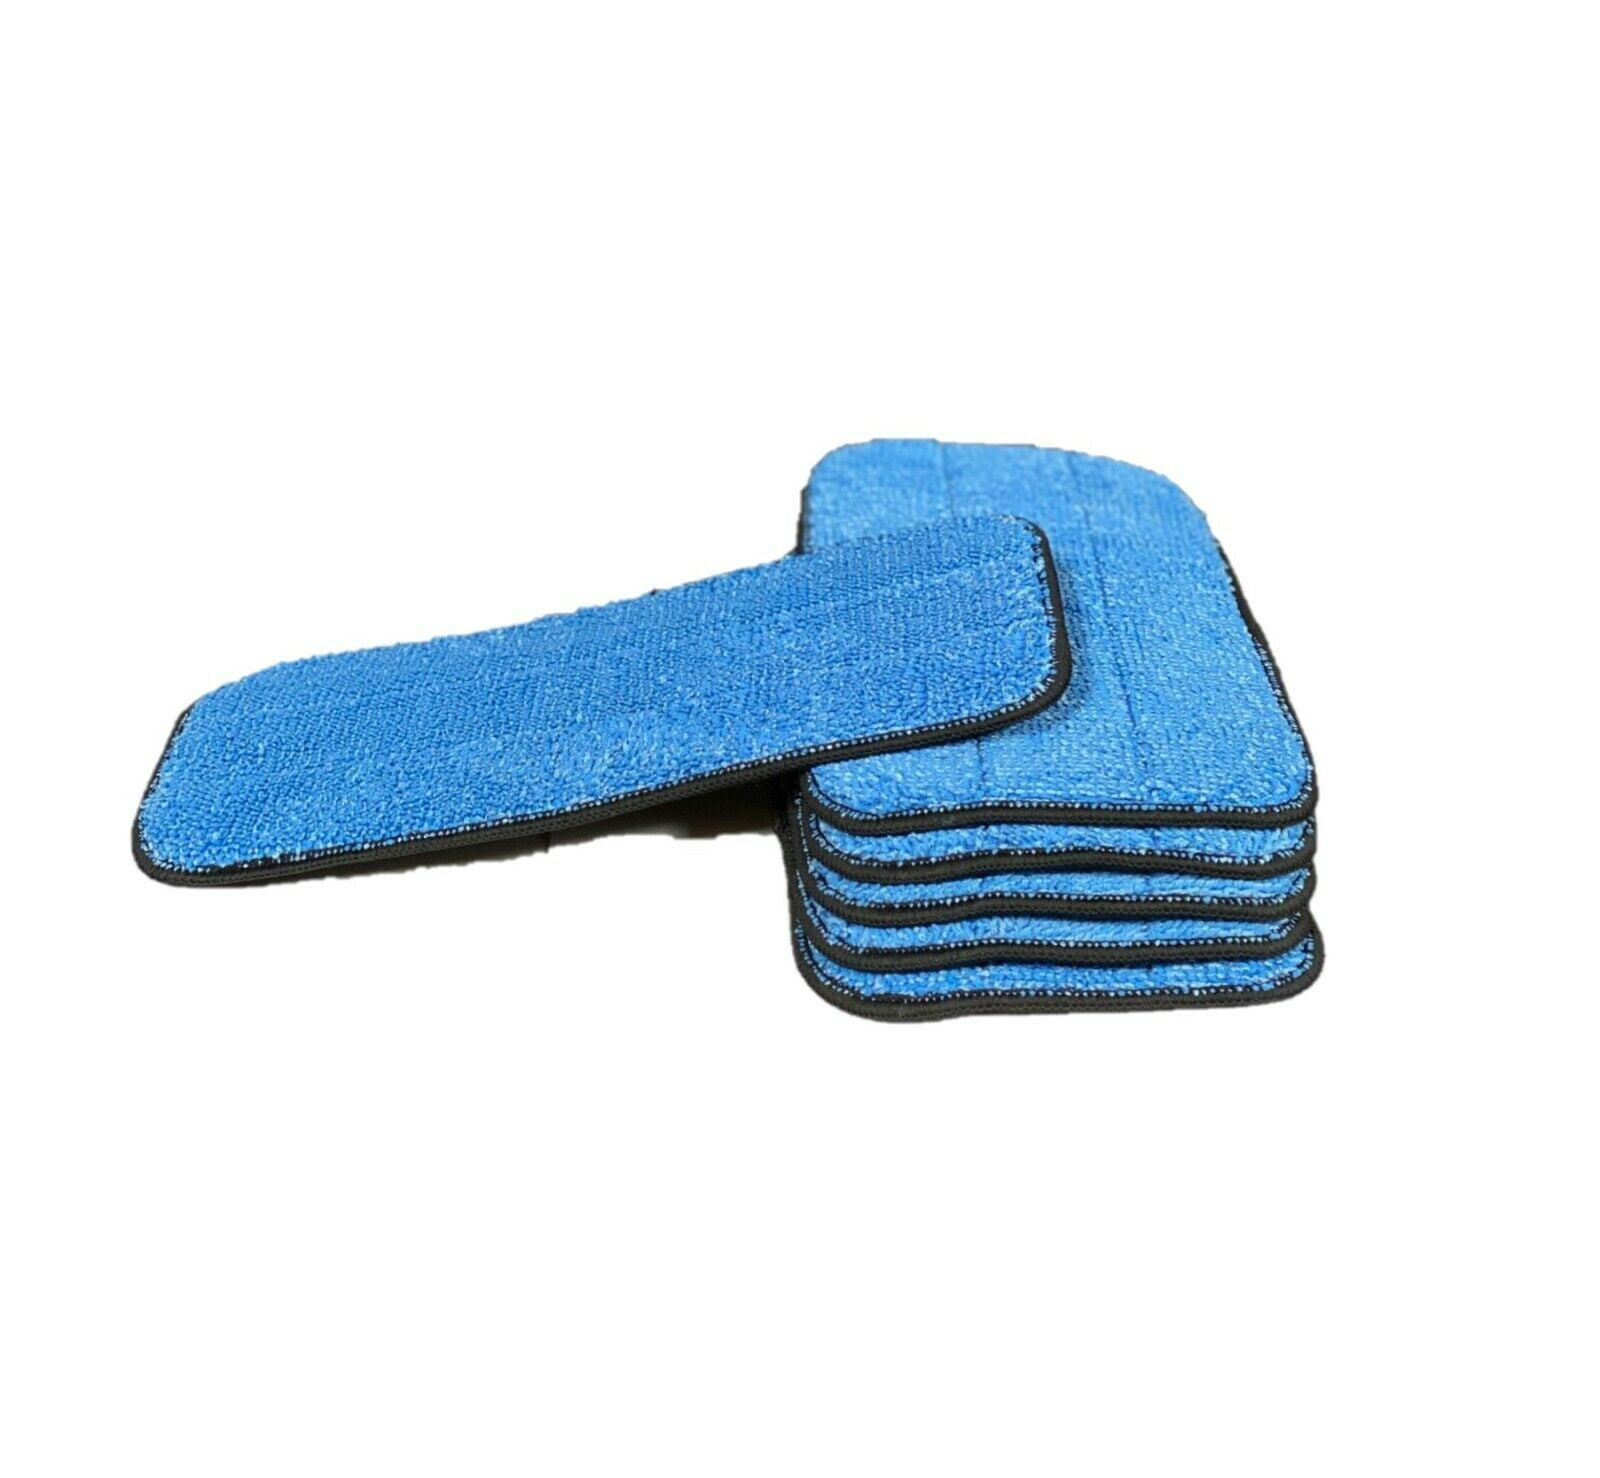 10 Inch Microfiber Mop Pad Refills Fits 9 to 10 Inch Mop Frames Wet & Dry Use Home & Commercial Microfiber 6 Pack 